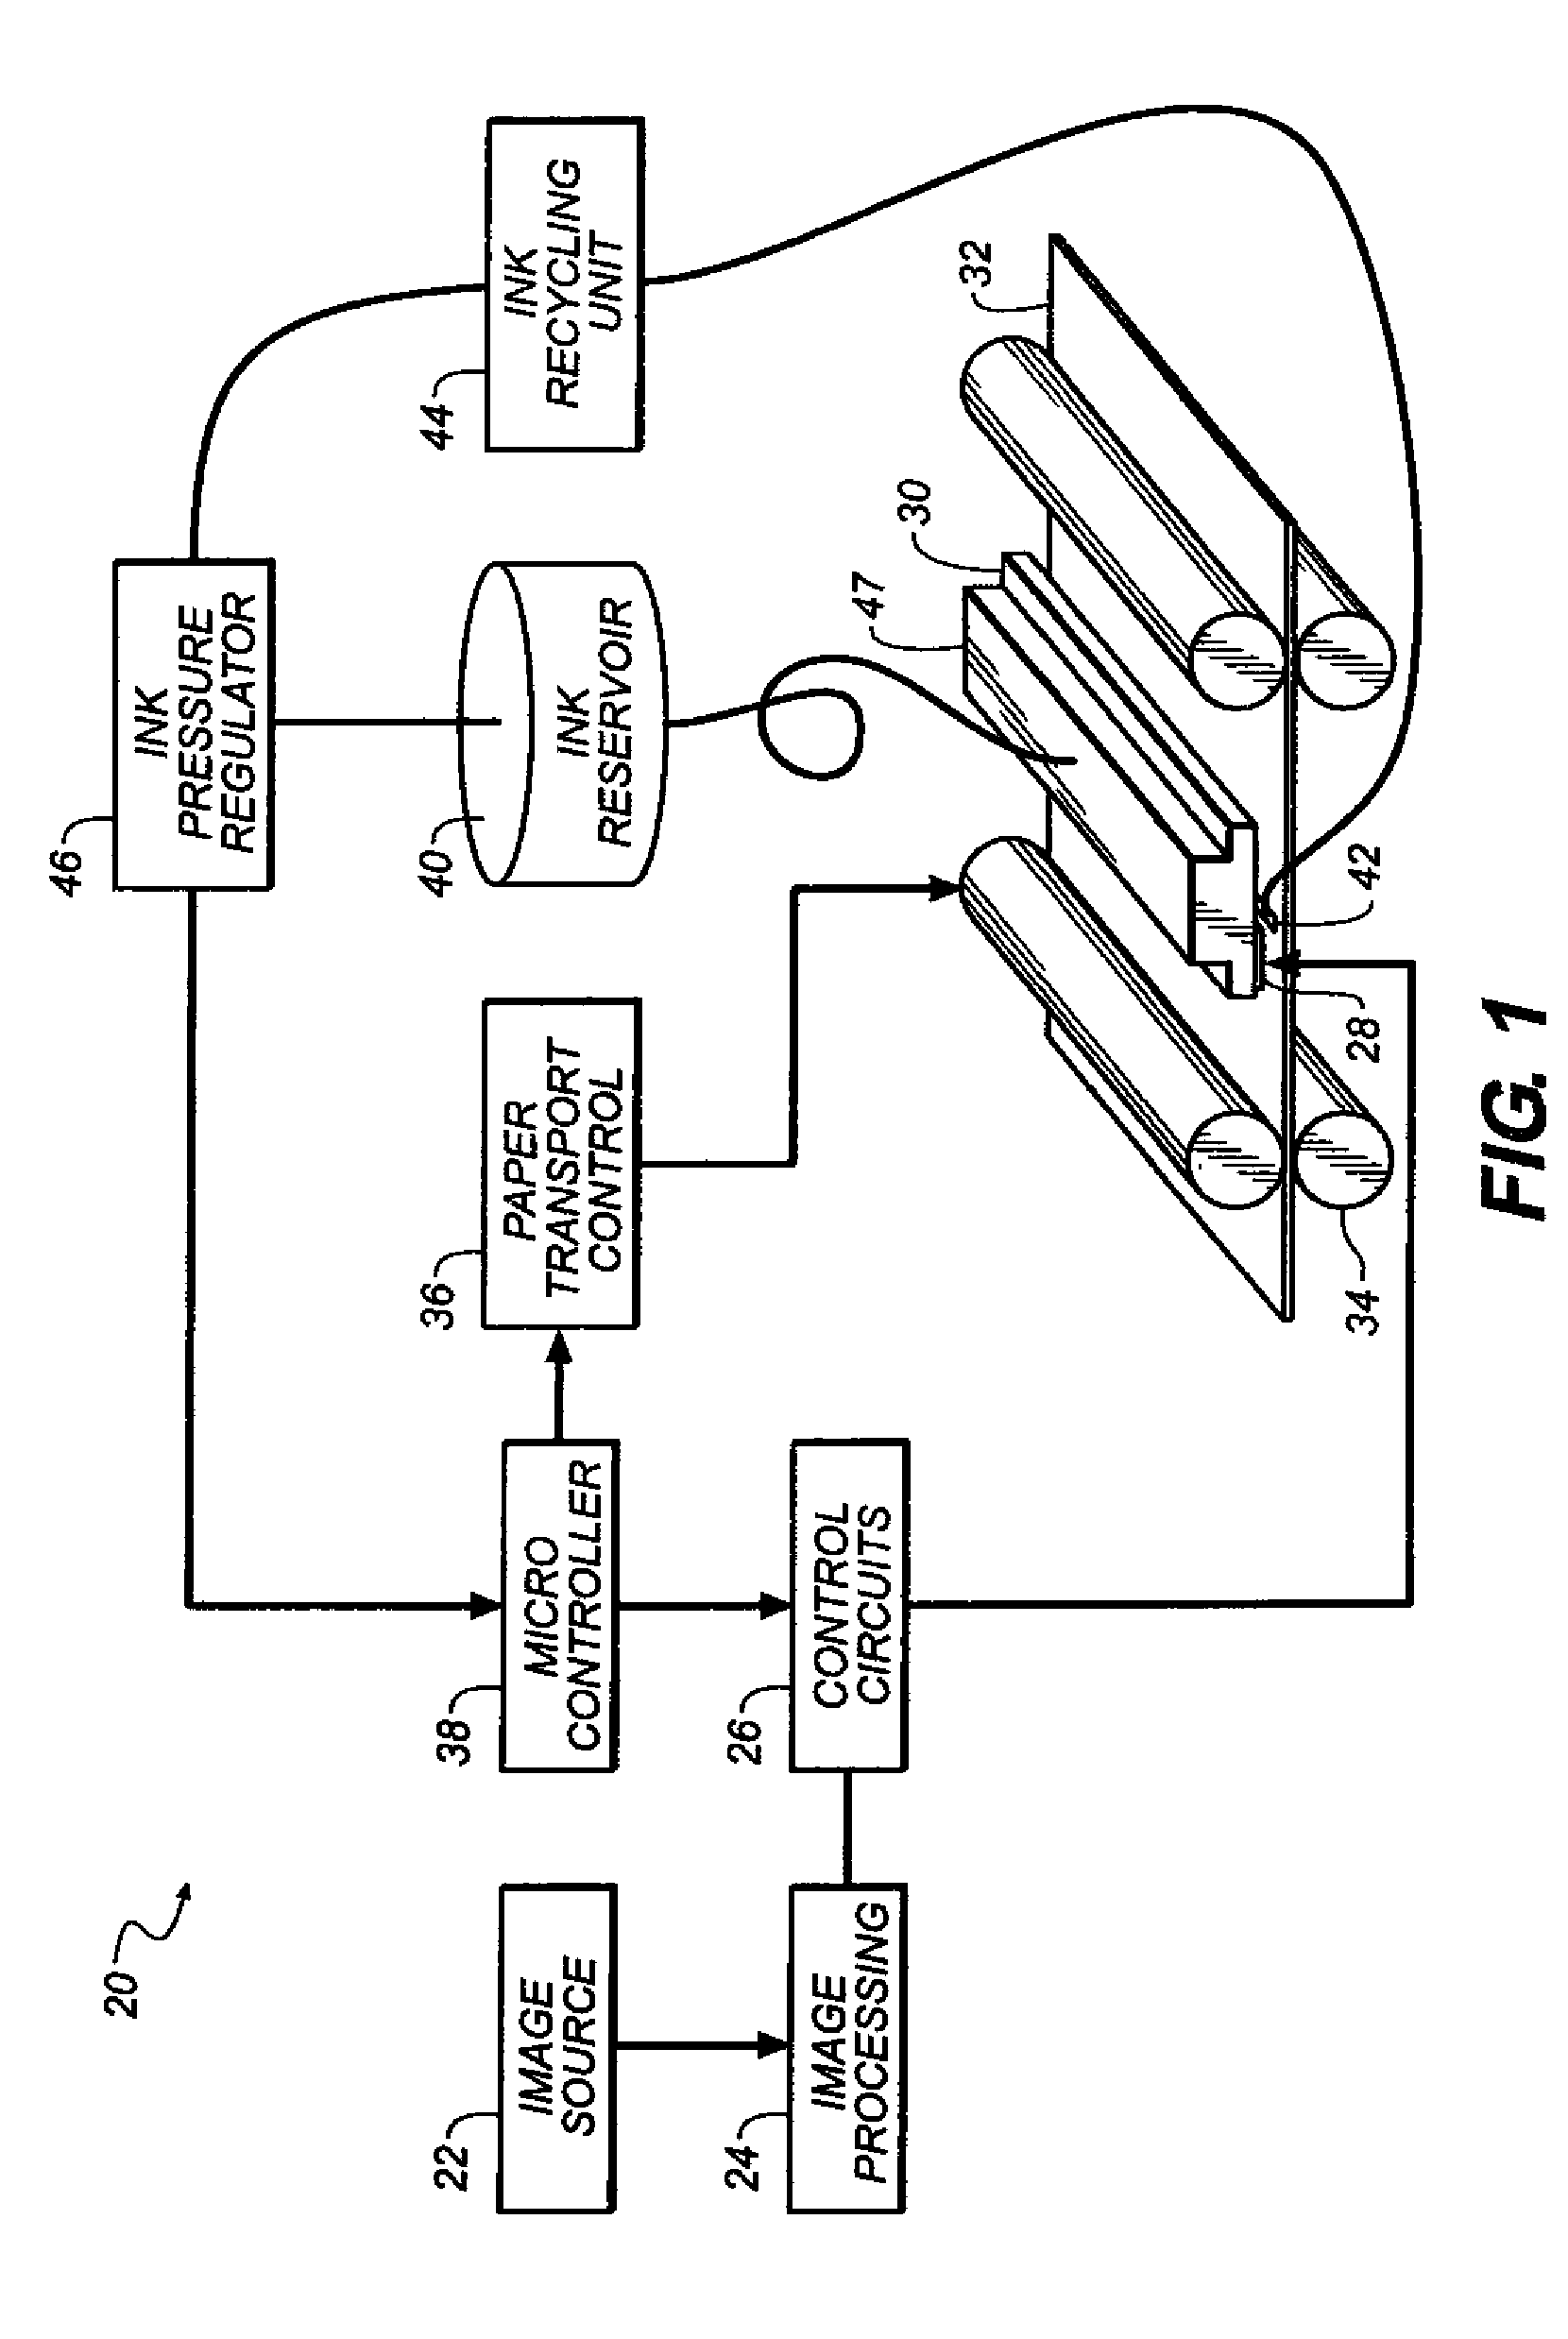 Thermal cleaning of individual jetting module nozzles